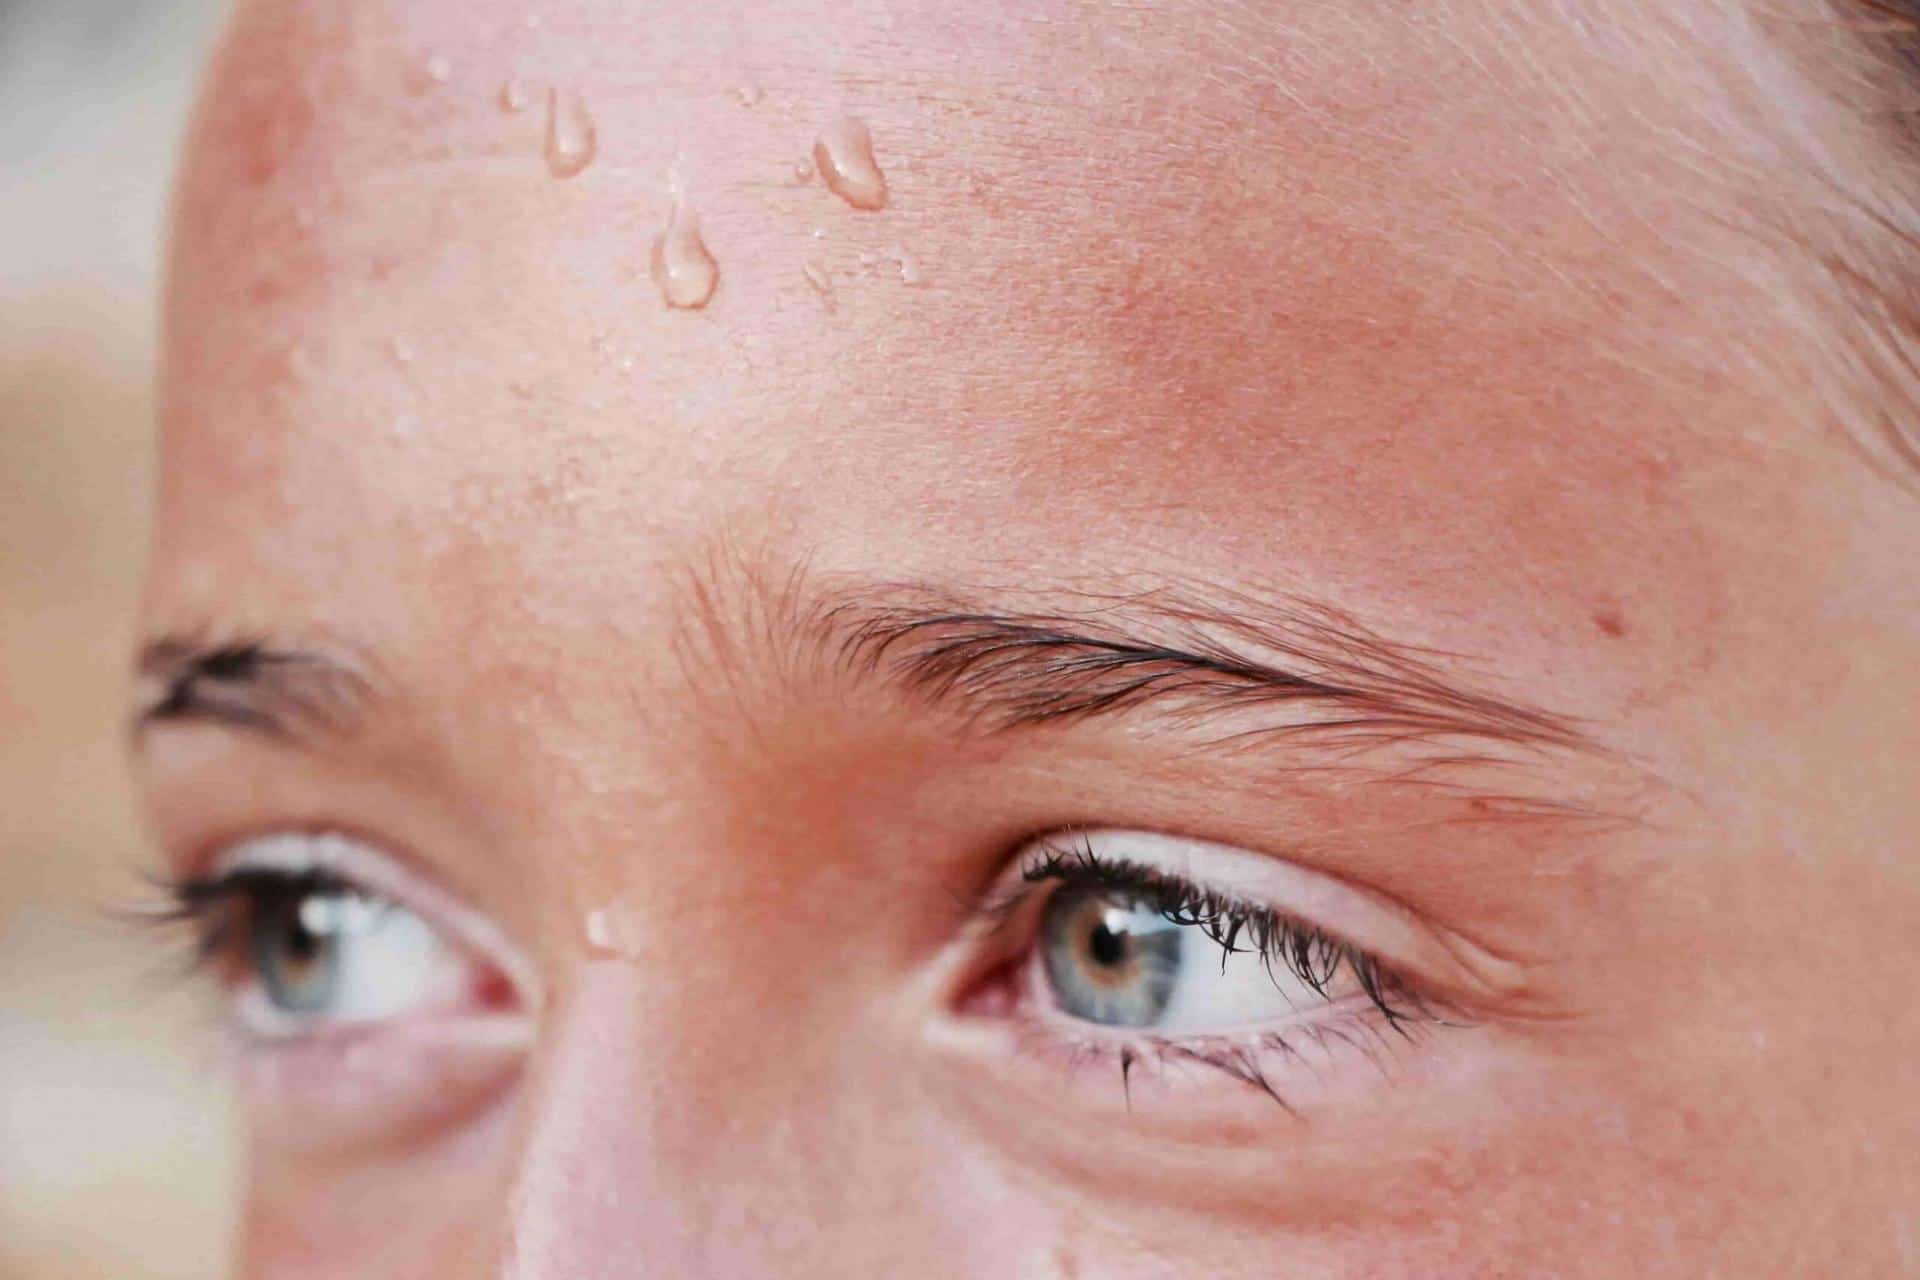 Beads of sweat on a person's face